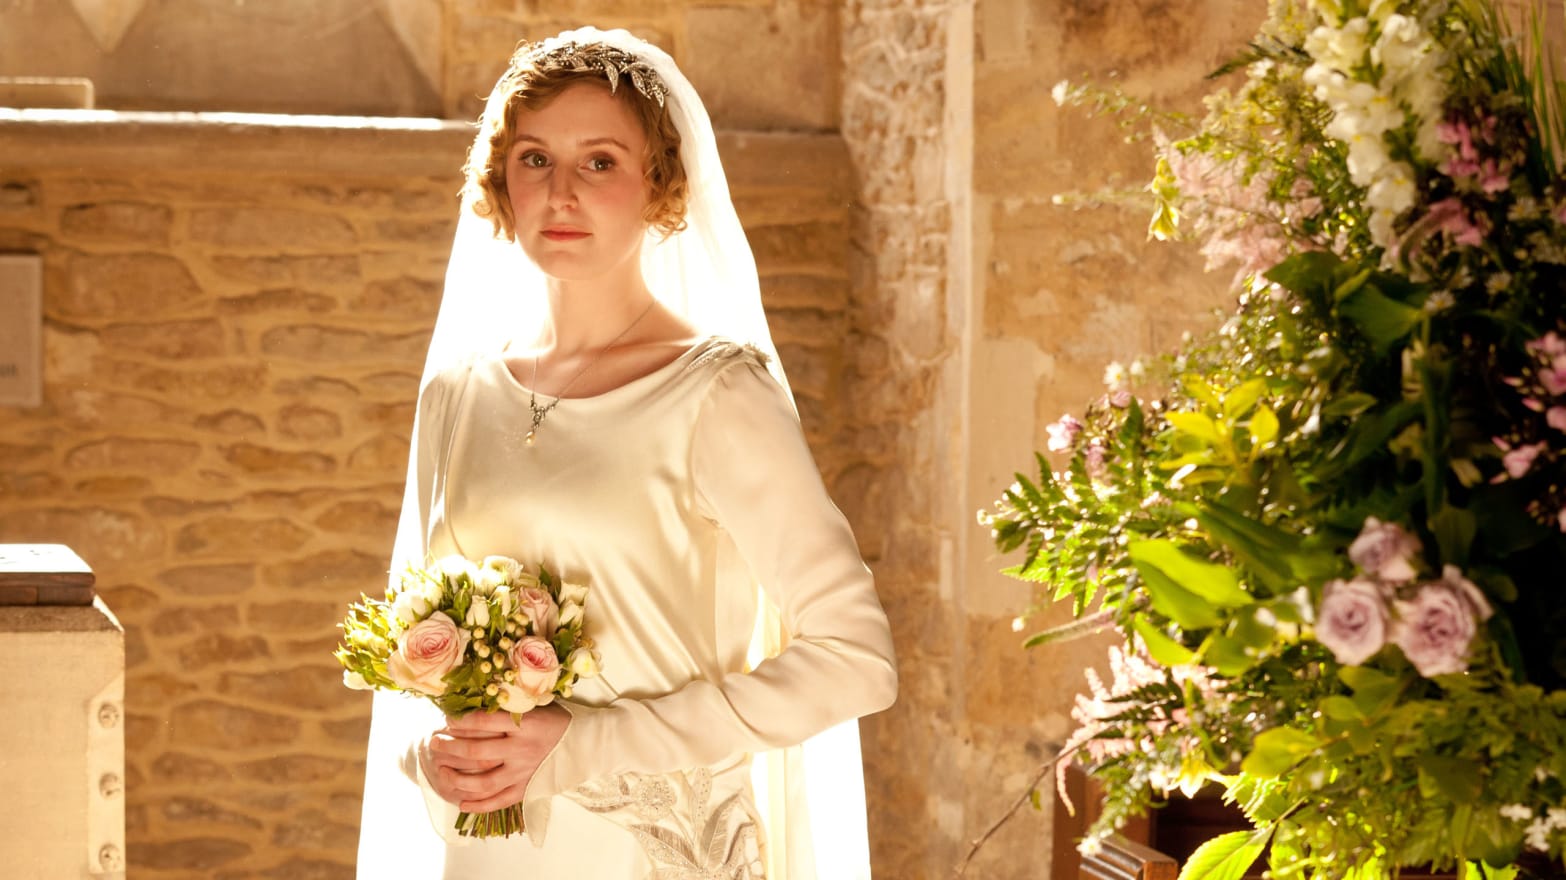 Meet the 'Downton Abbey' Costume Queen